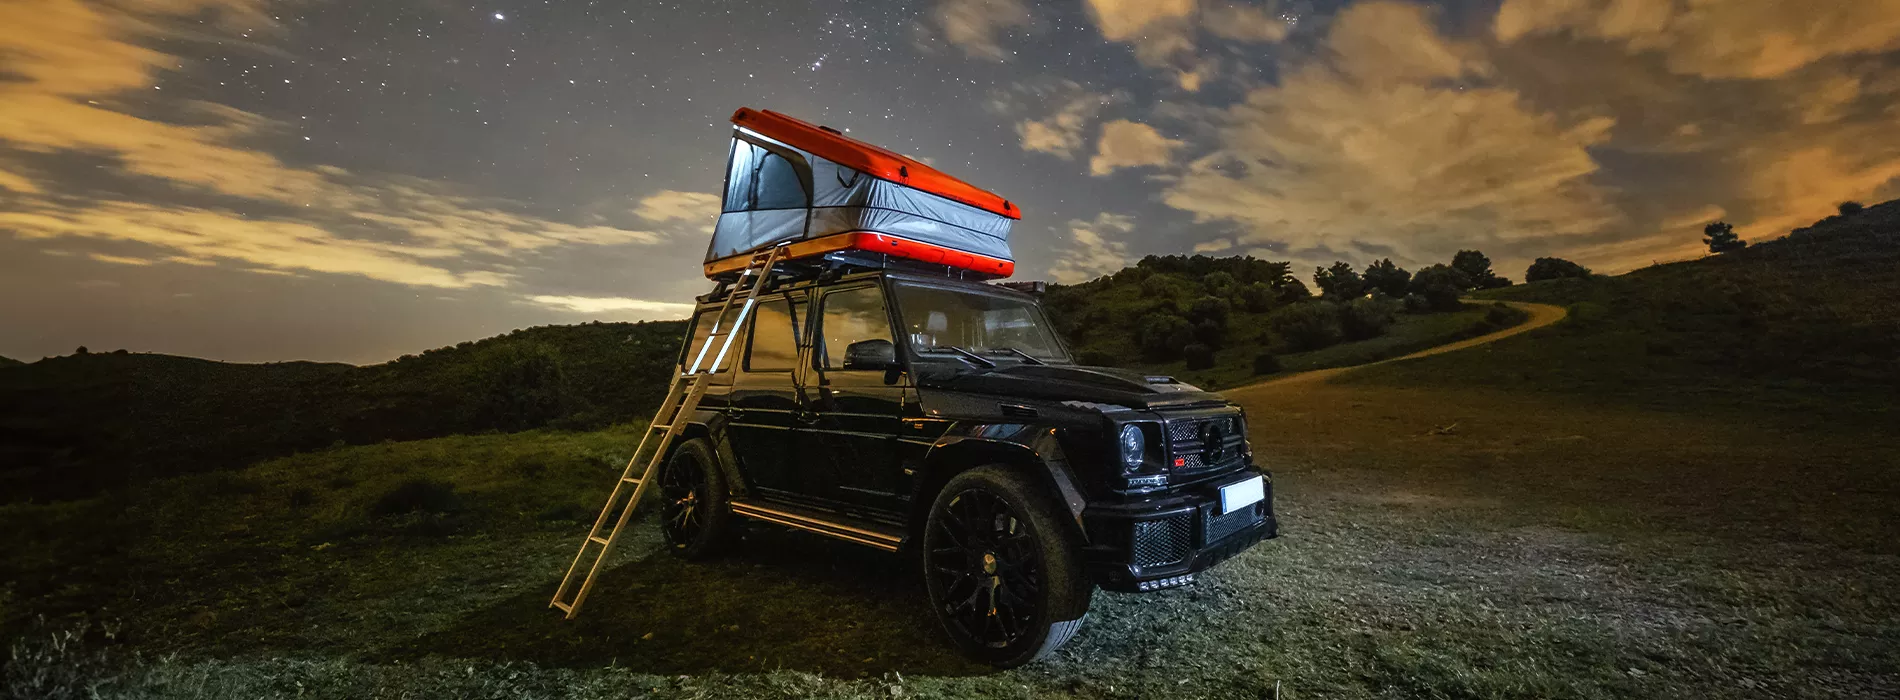 Camper Fontanilles with James Baroud Space Red open under a starry night sky